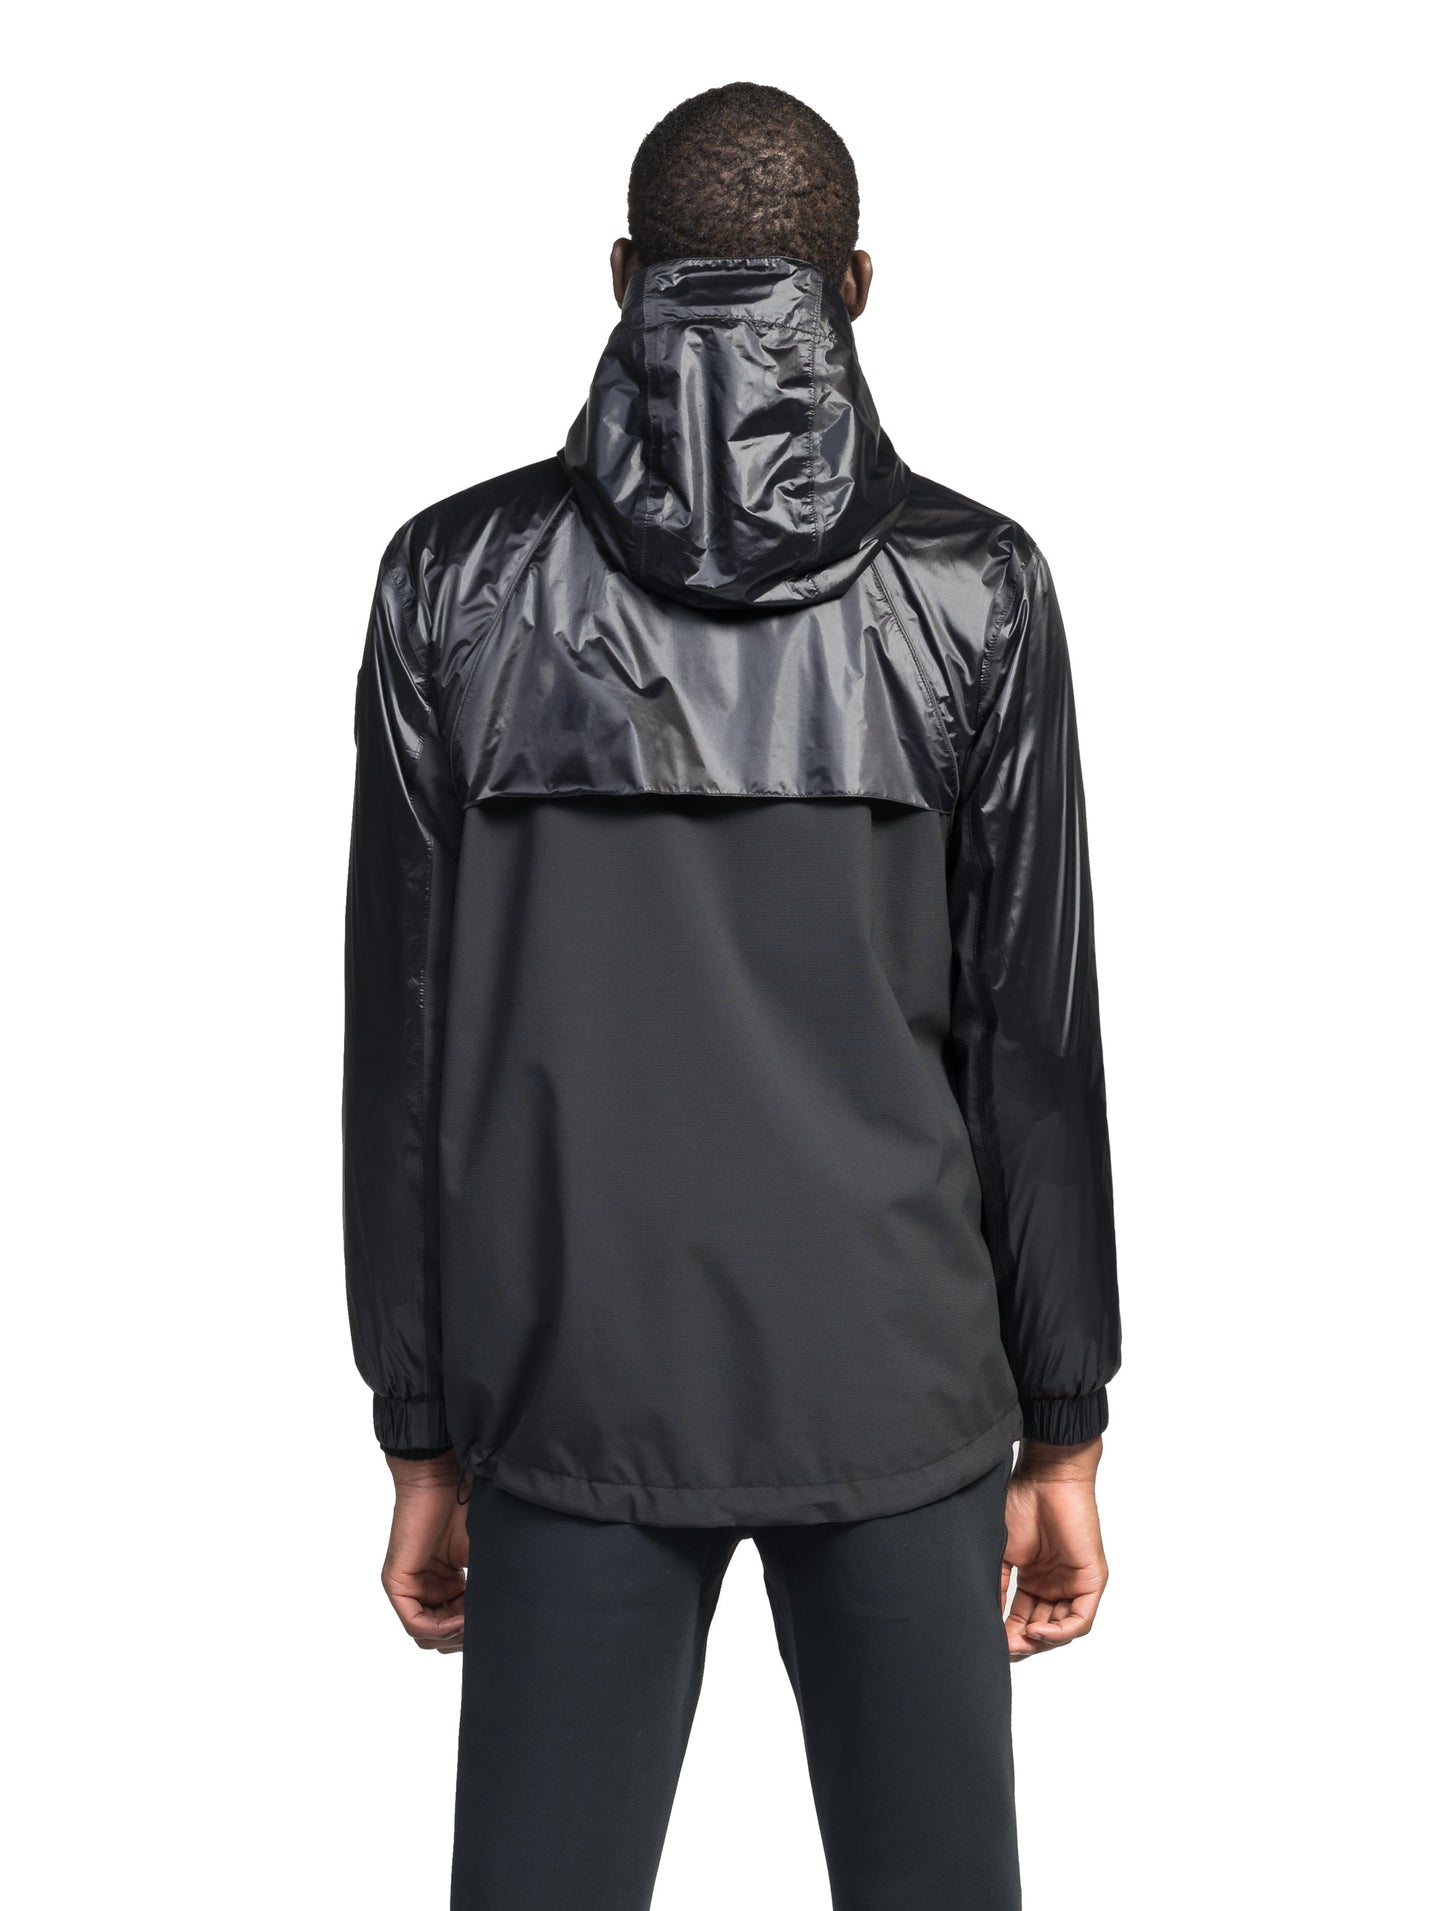 Stratus Men's Tailored Packable Rain Jacket in hip length, premium cire technical nylon taffeta and stretch ripstop fabrication, highly breathable mesh lining, hidden packable pocket, non-removable hood with adjustable draw cord, reflective piping along front and back, underarm grommets for extra breathability, back yoke with mesh ventilation, two waist zipper pockets, two interior zipper pockets, elastic cuffs with adjustable snap button, and adjustable interior draw cord at waist hem, in Black